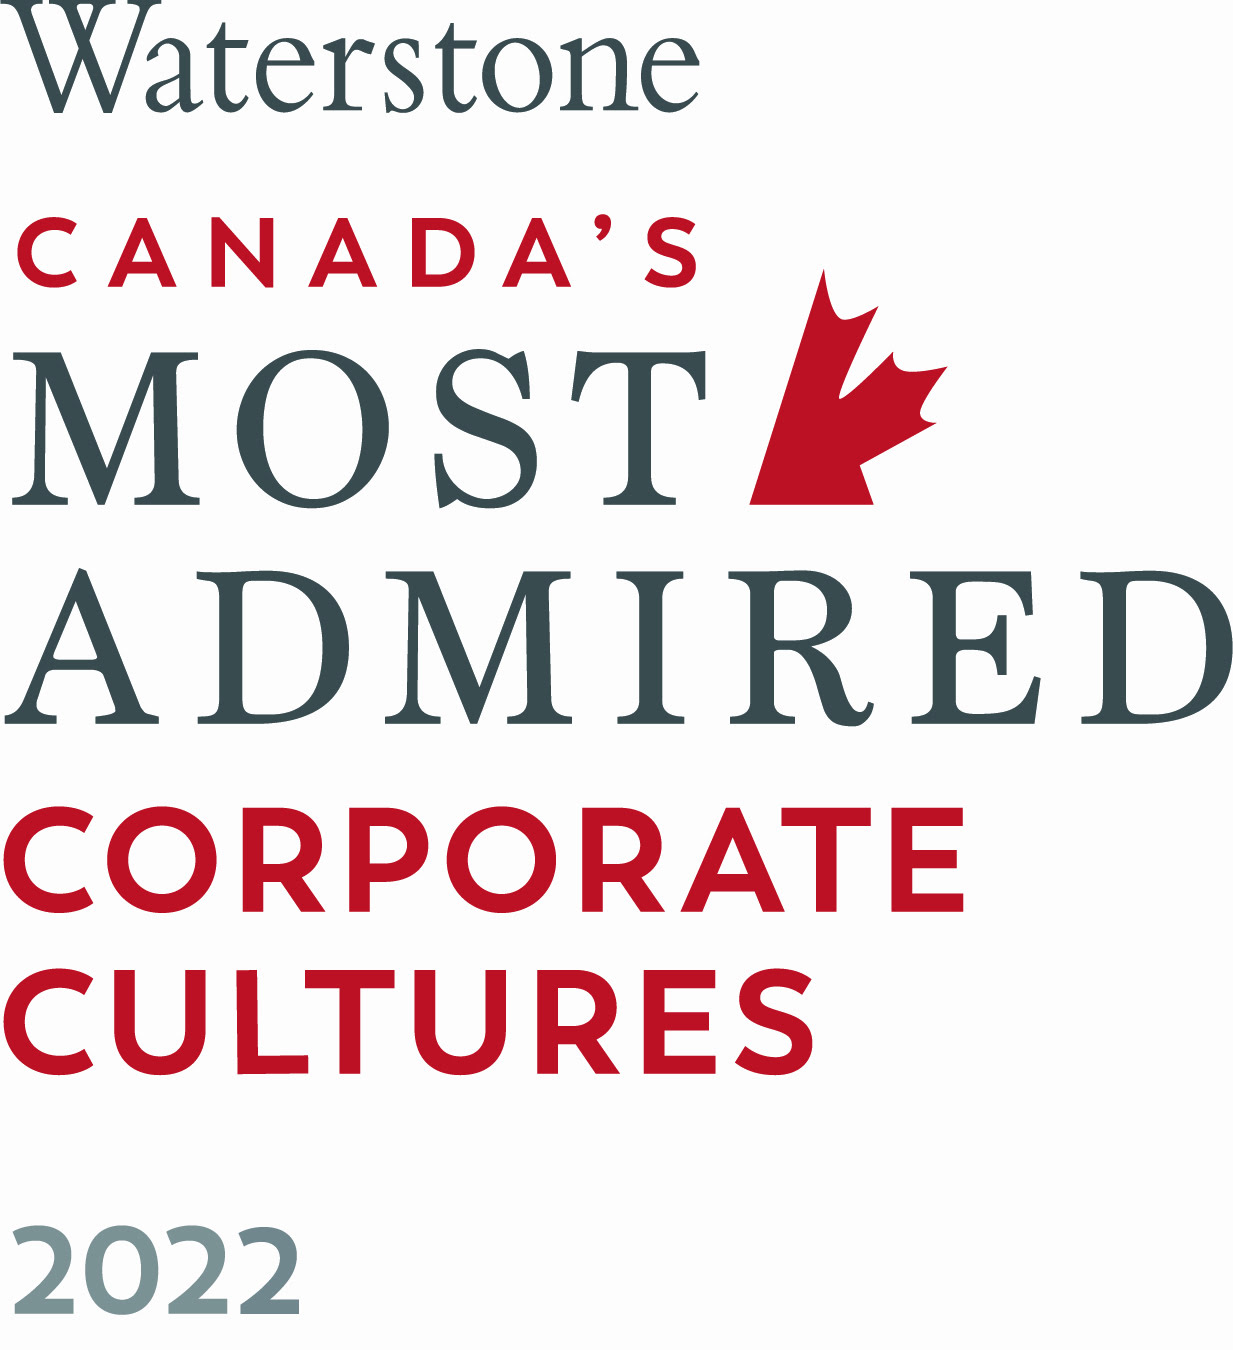 Waterstone Canada's Most Admired Corporate Cultures